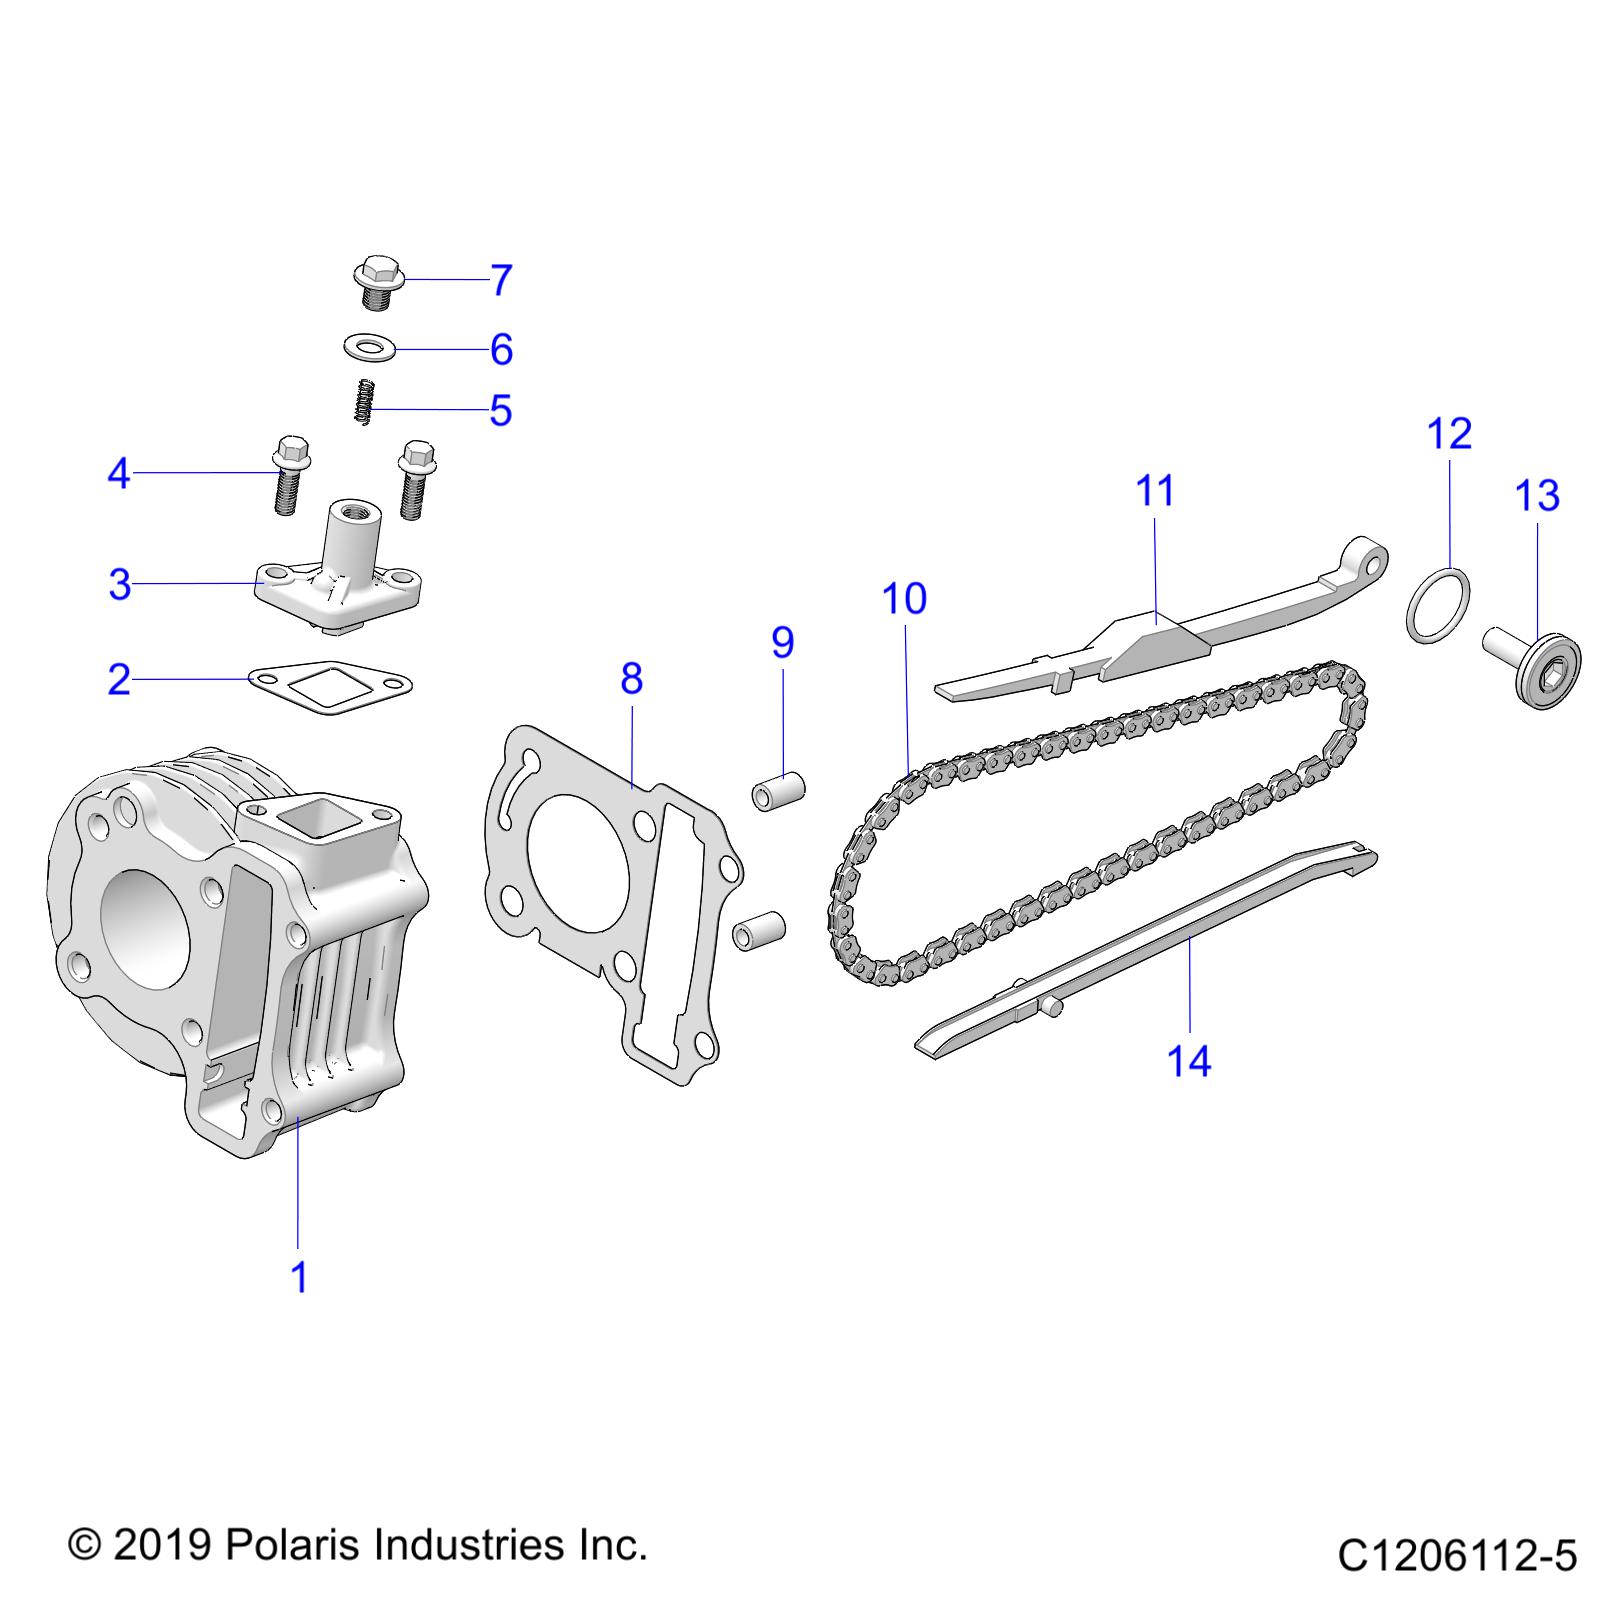 Part Number : 3023862 GUIDE CHAIN